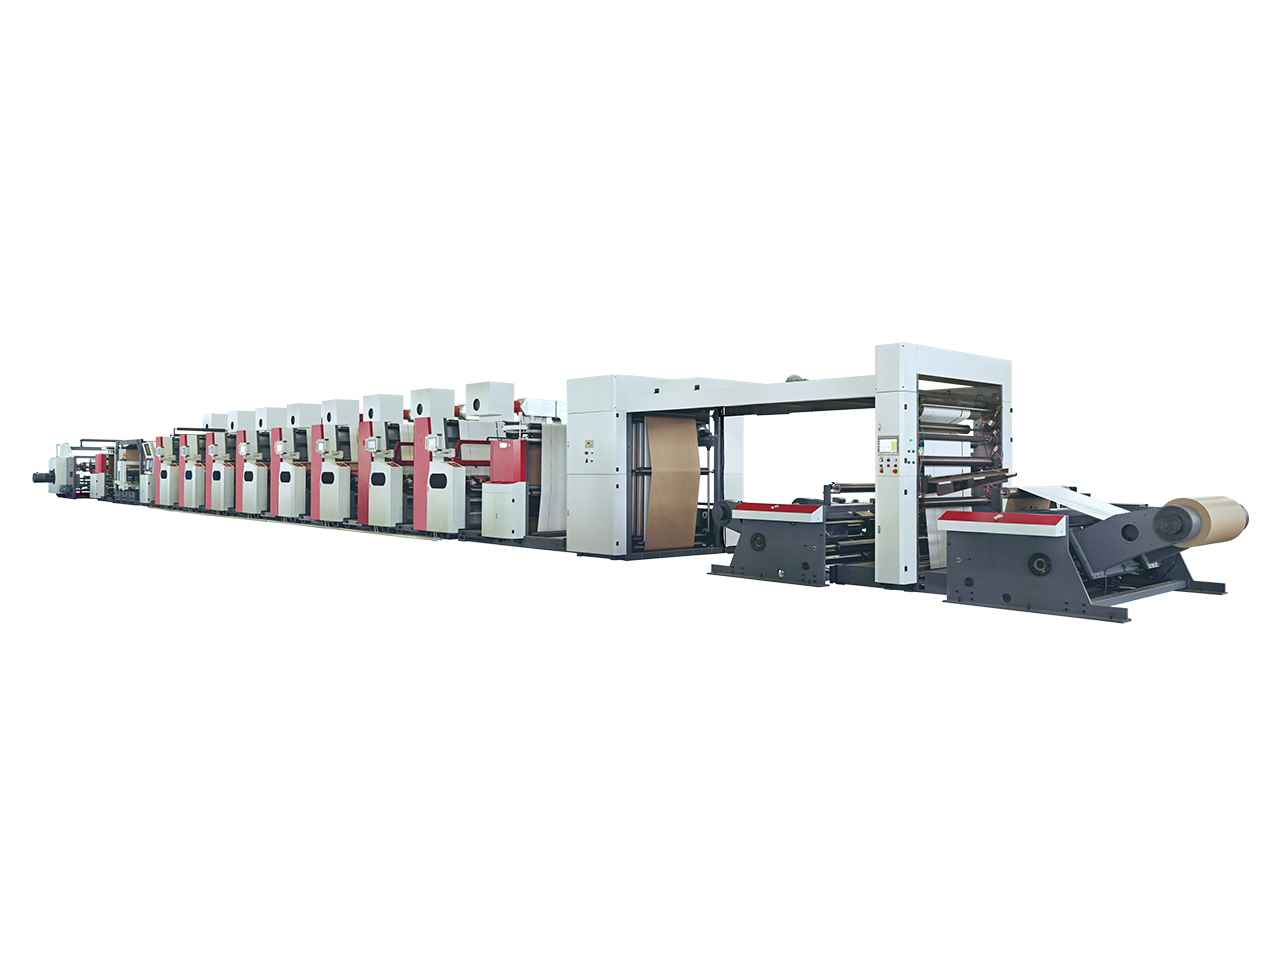 DH-JIAOLONG SERIES WIDE WEB FLEXO PRESS(WEB WIDTH 1430-2200MM)-Osum is the professional manufacturers of Printing and packaging machinery in China.